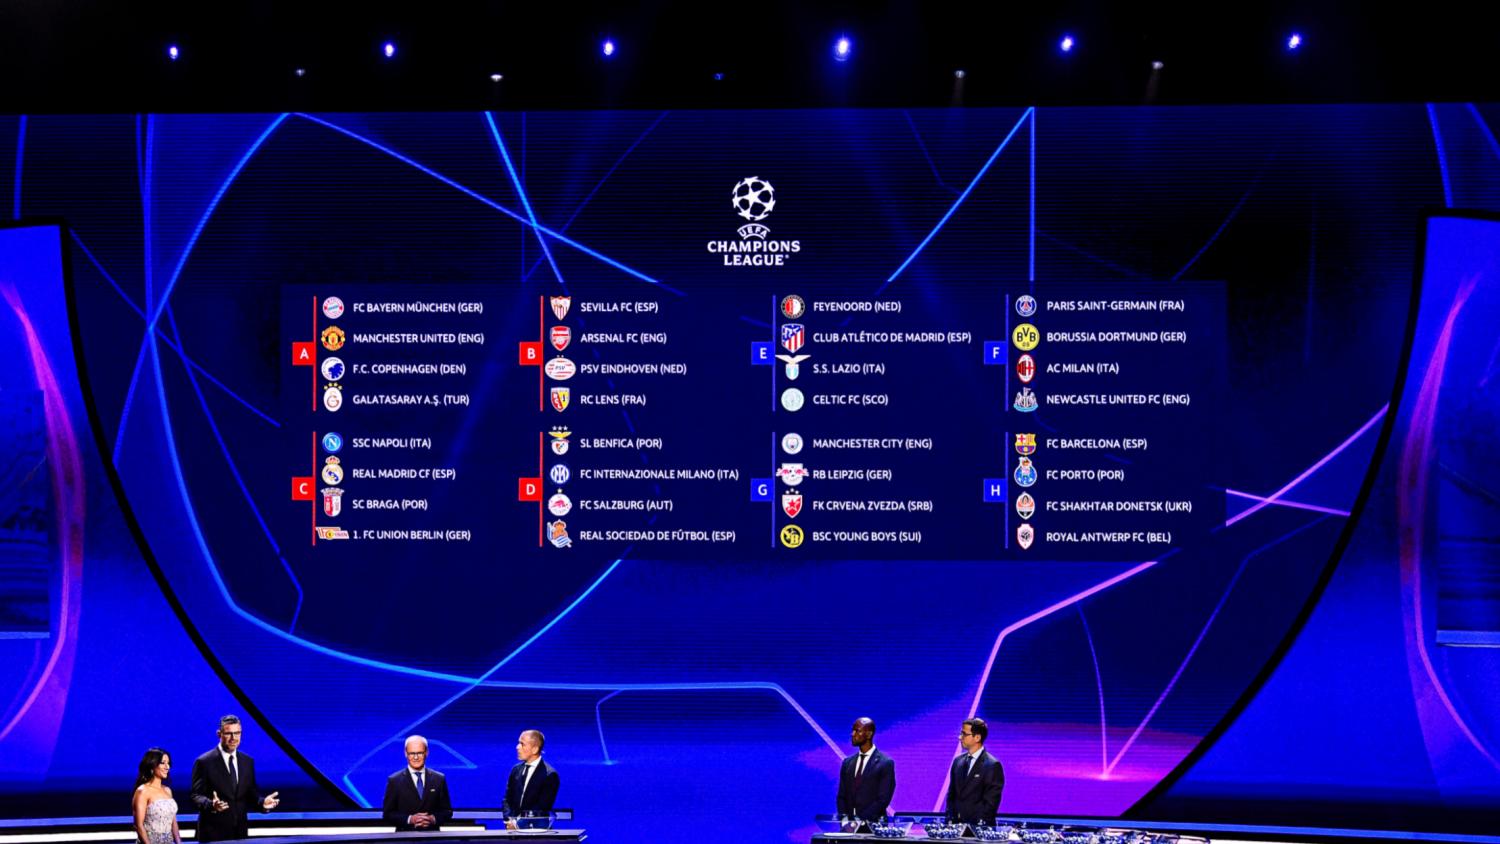 How To Watch Champions League Group Stage In The U.S.